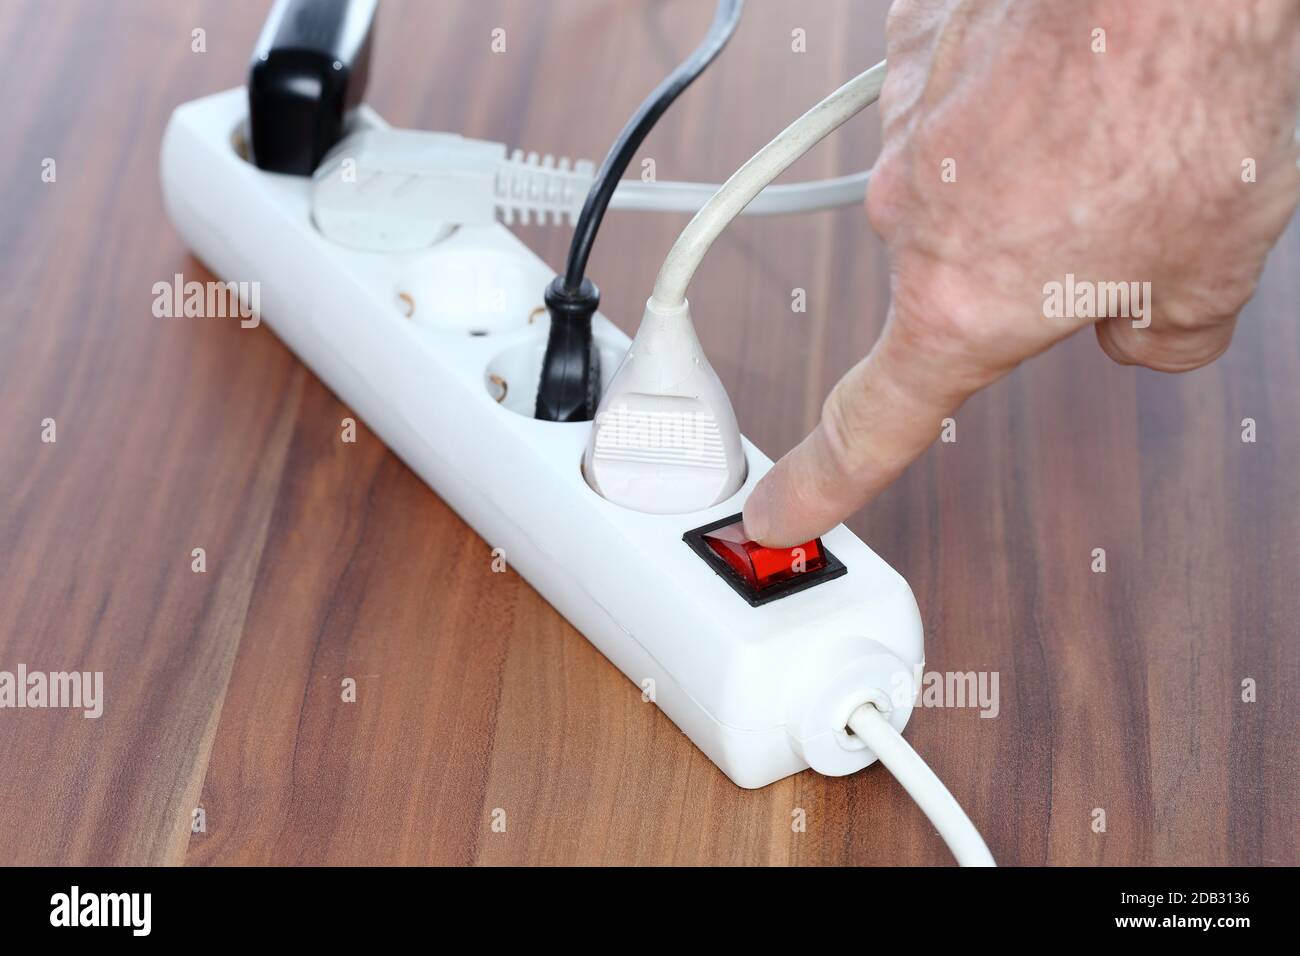 switching off a white plug socket with hand Stock Photo